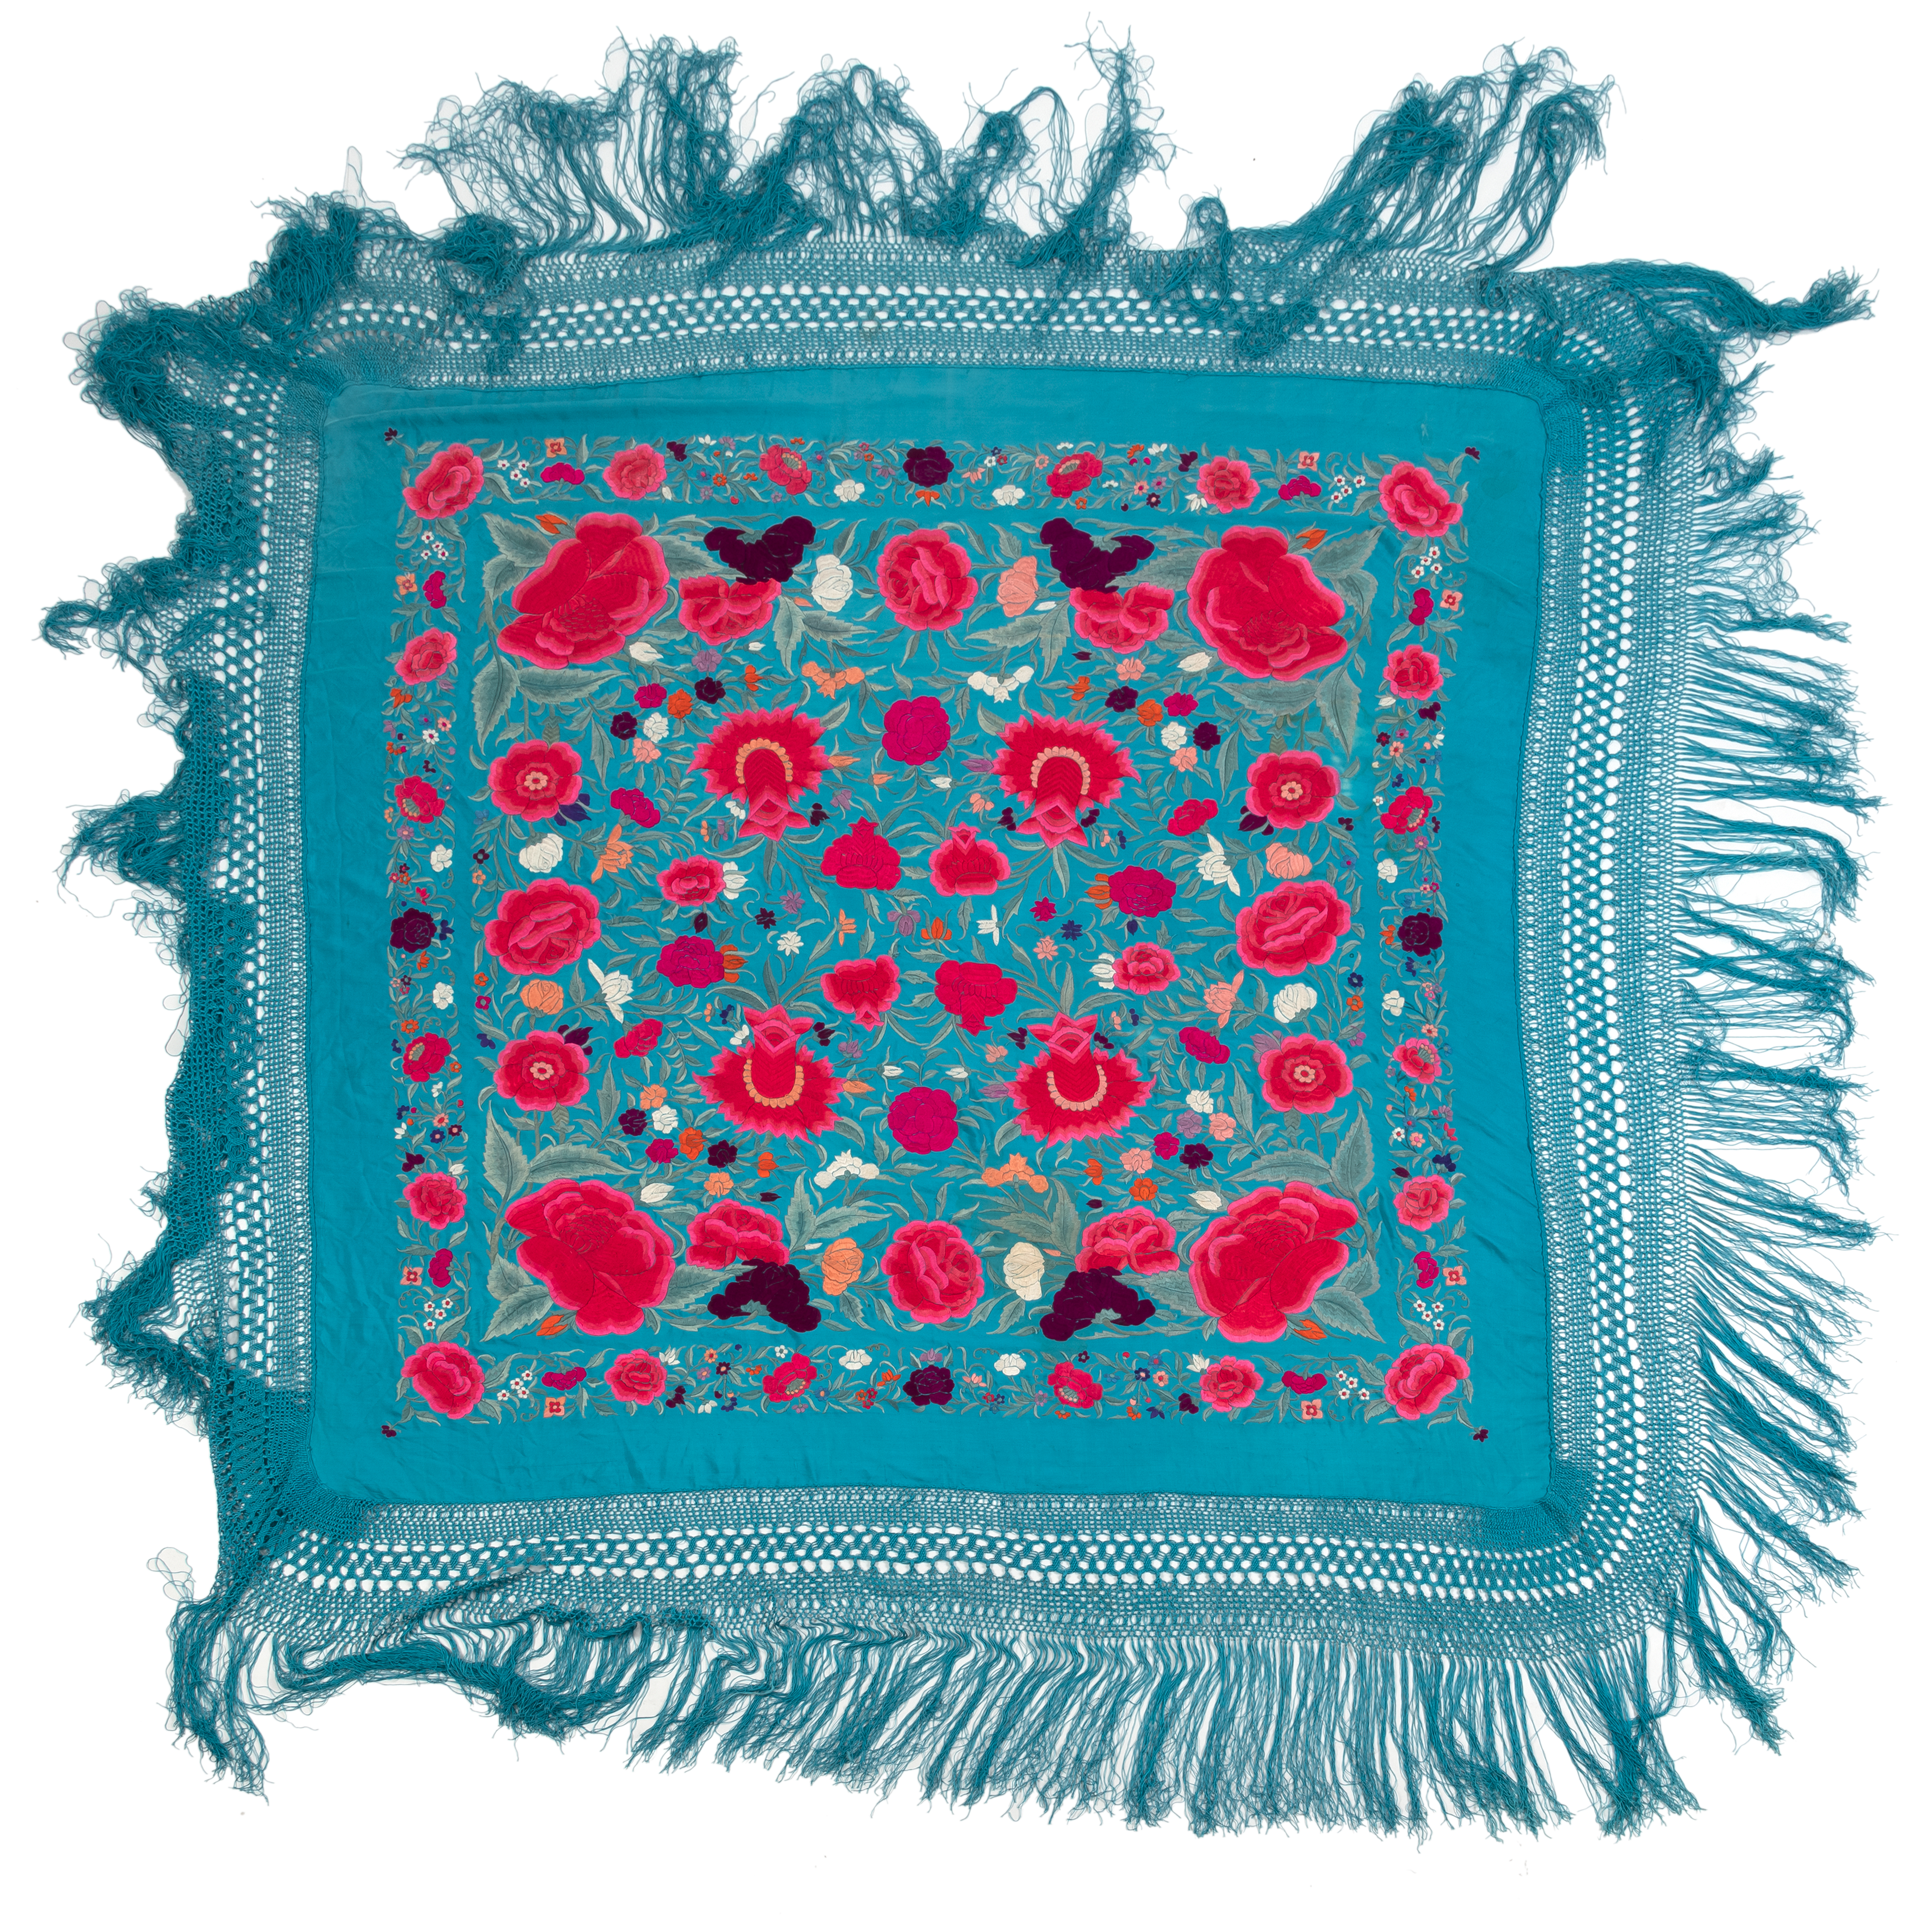 AN EMBROIDERED SILK COVER WITH PINK FLOWERS ON TURQUOISE SATIN AND KNOTTED FRINGES - Image 2 of 2